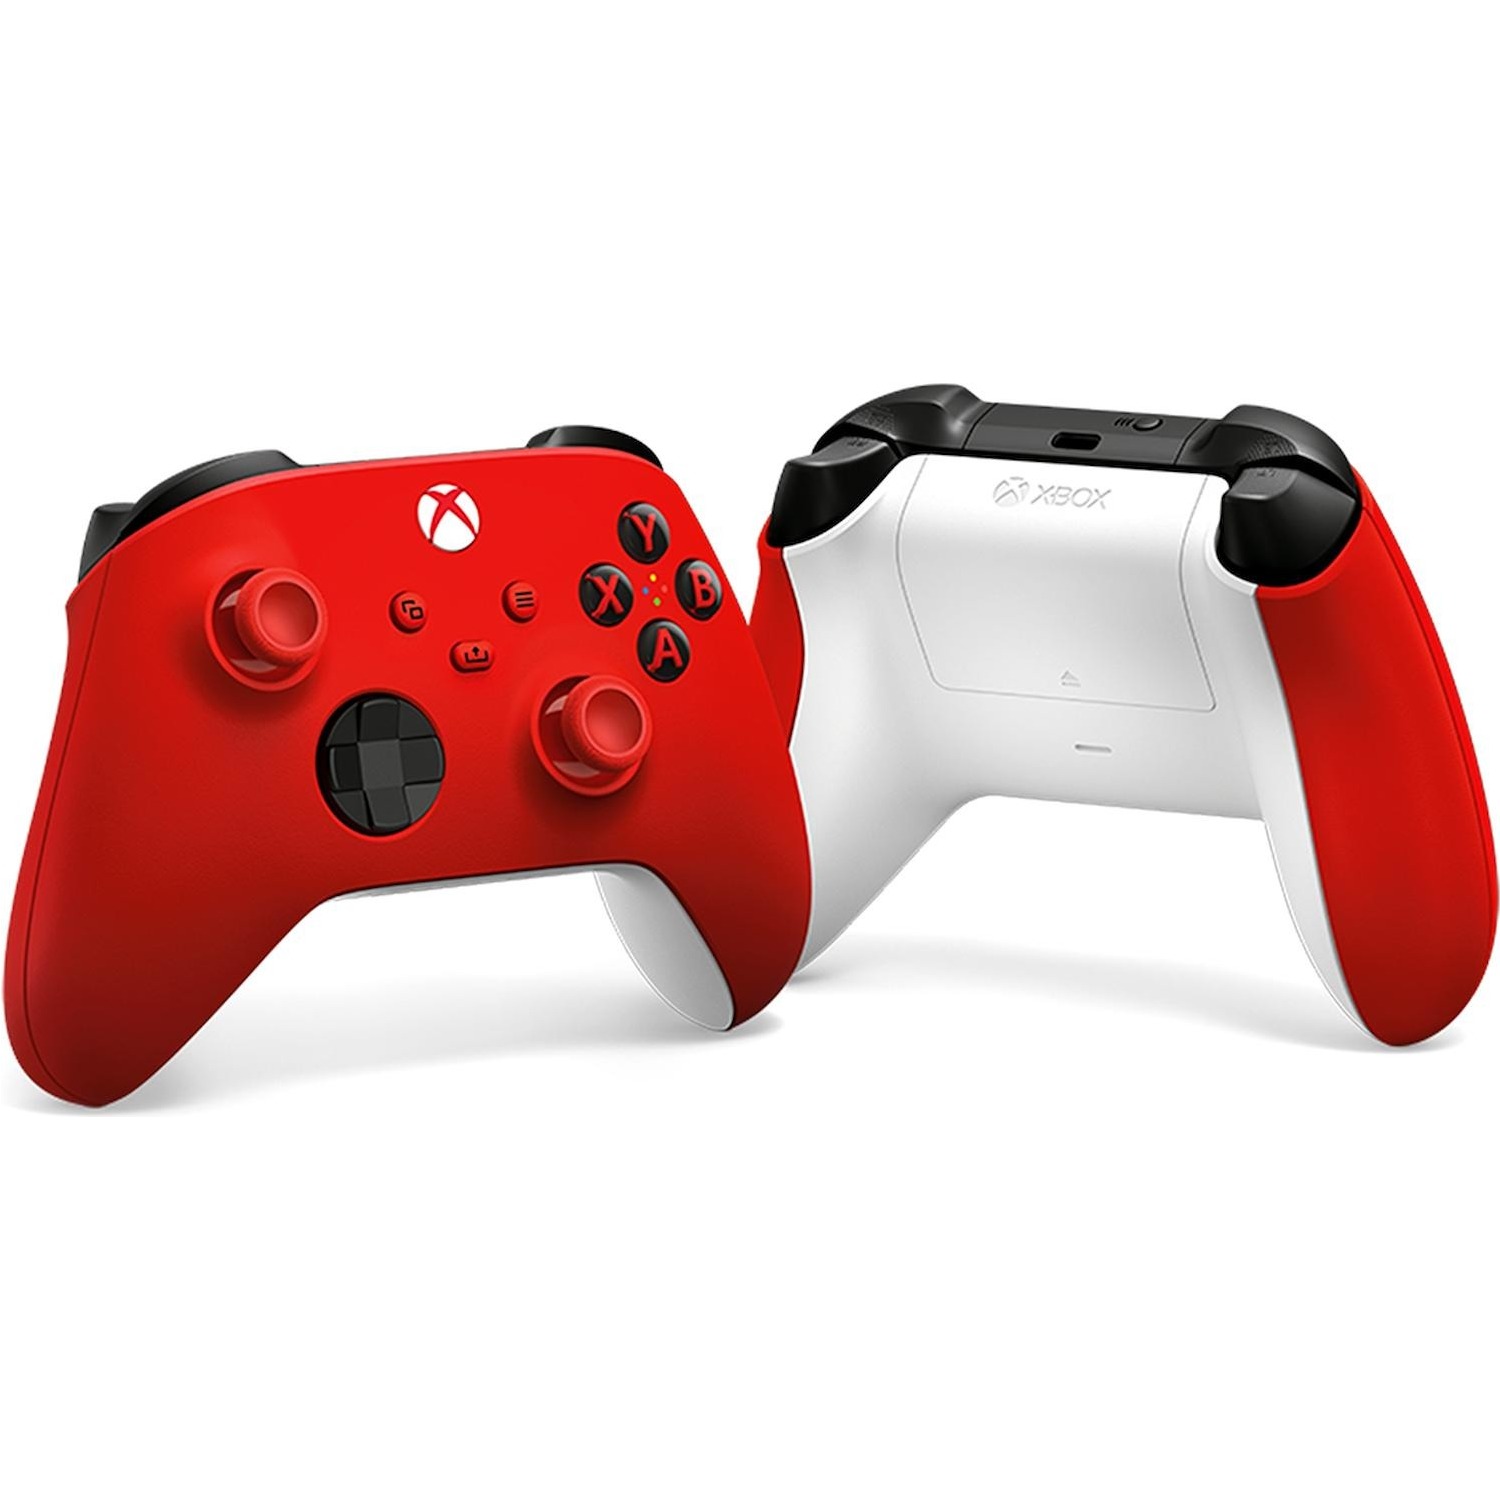 Microsoft XBOX Series S/X Pad Controller BT Pulse Red - DIMOStore